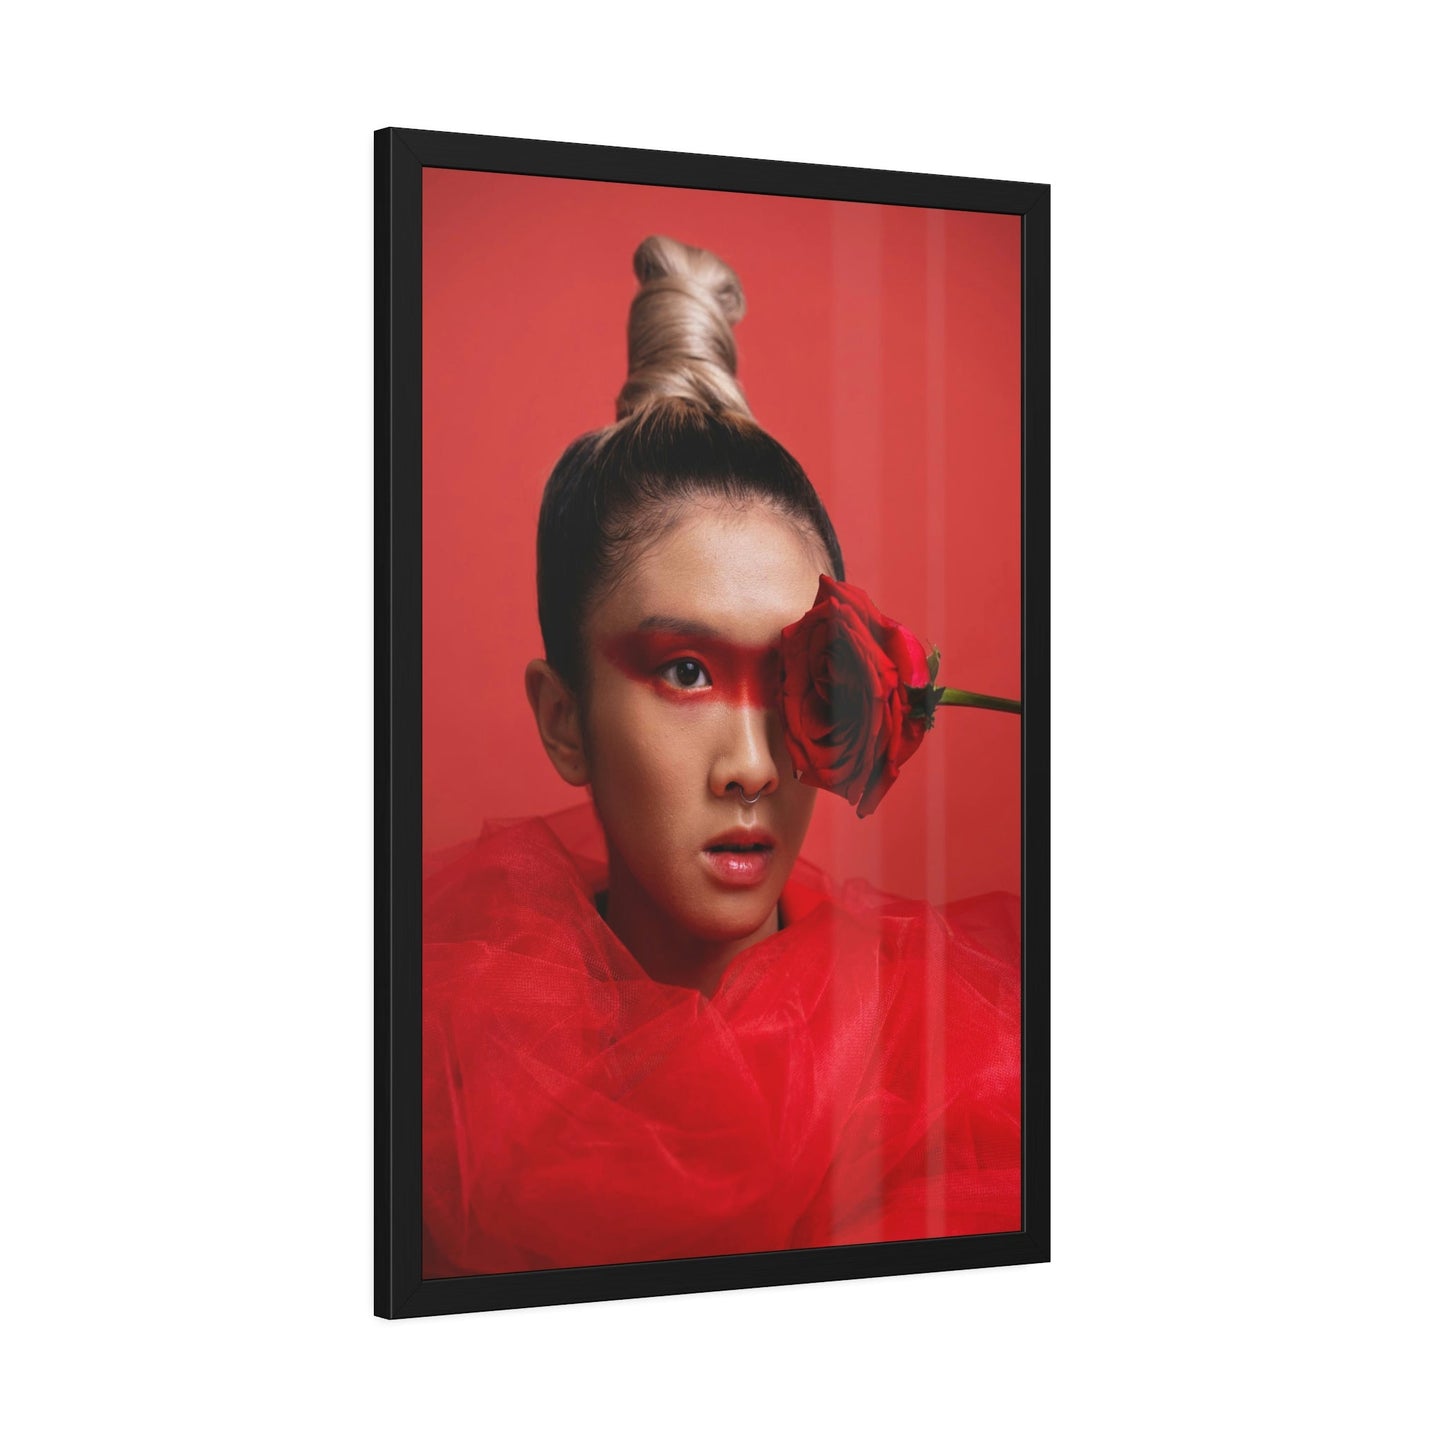 Chic and Stylish: A Framed Canvas of High Fashion and Beauty